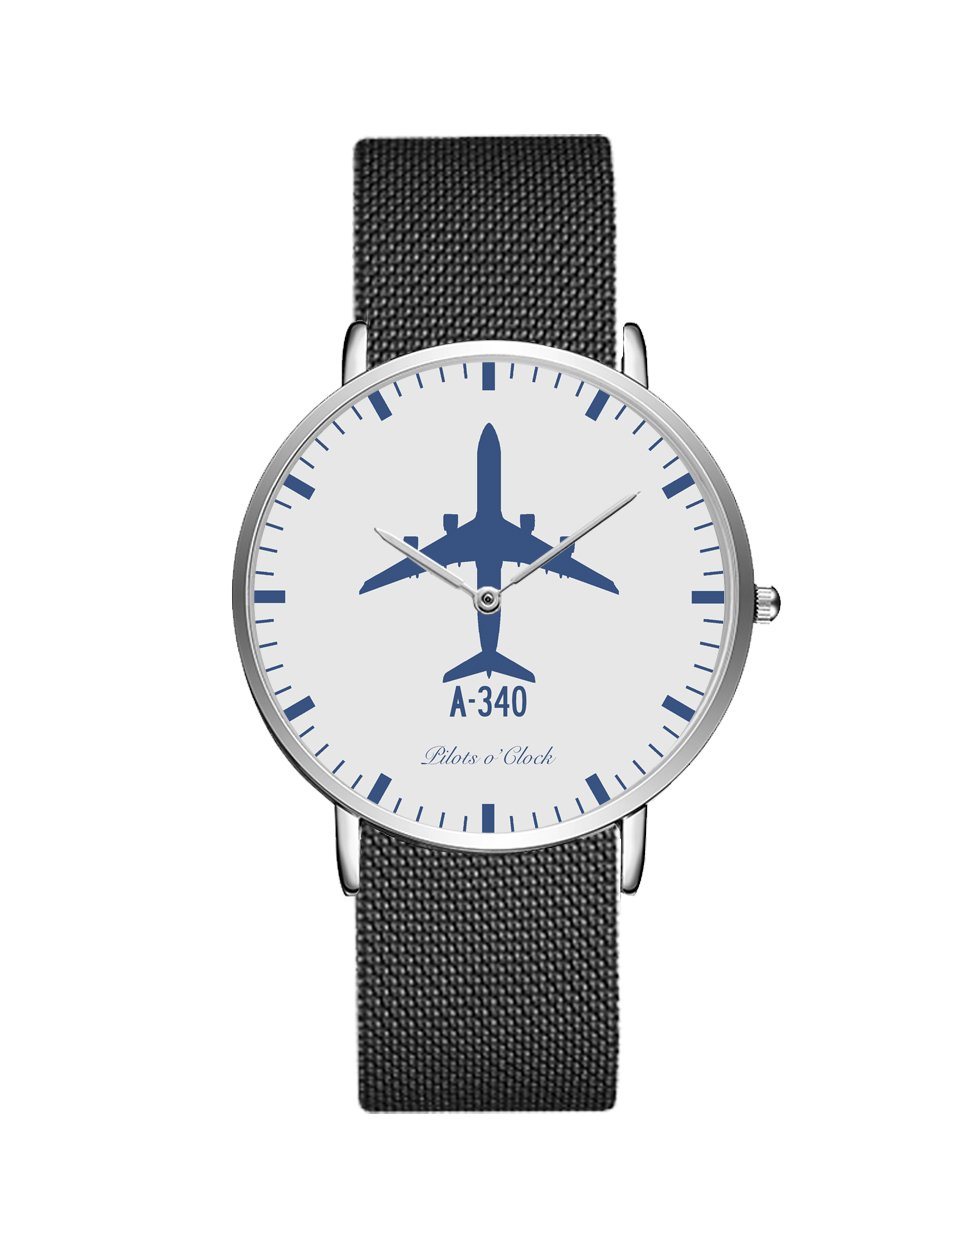 Airbus A340 Stainless Steel Strap Watches Pilot Eyes Store Silver & Black Stainless Steel Strap 